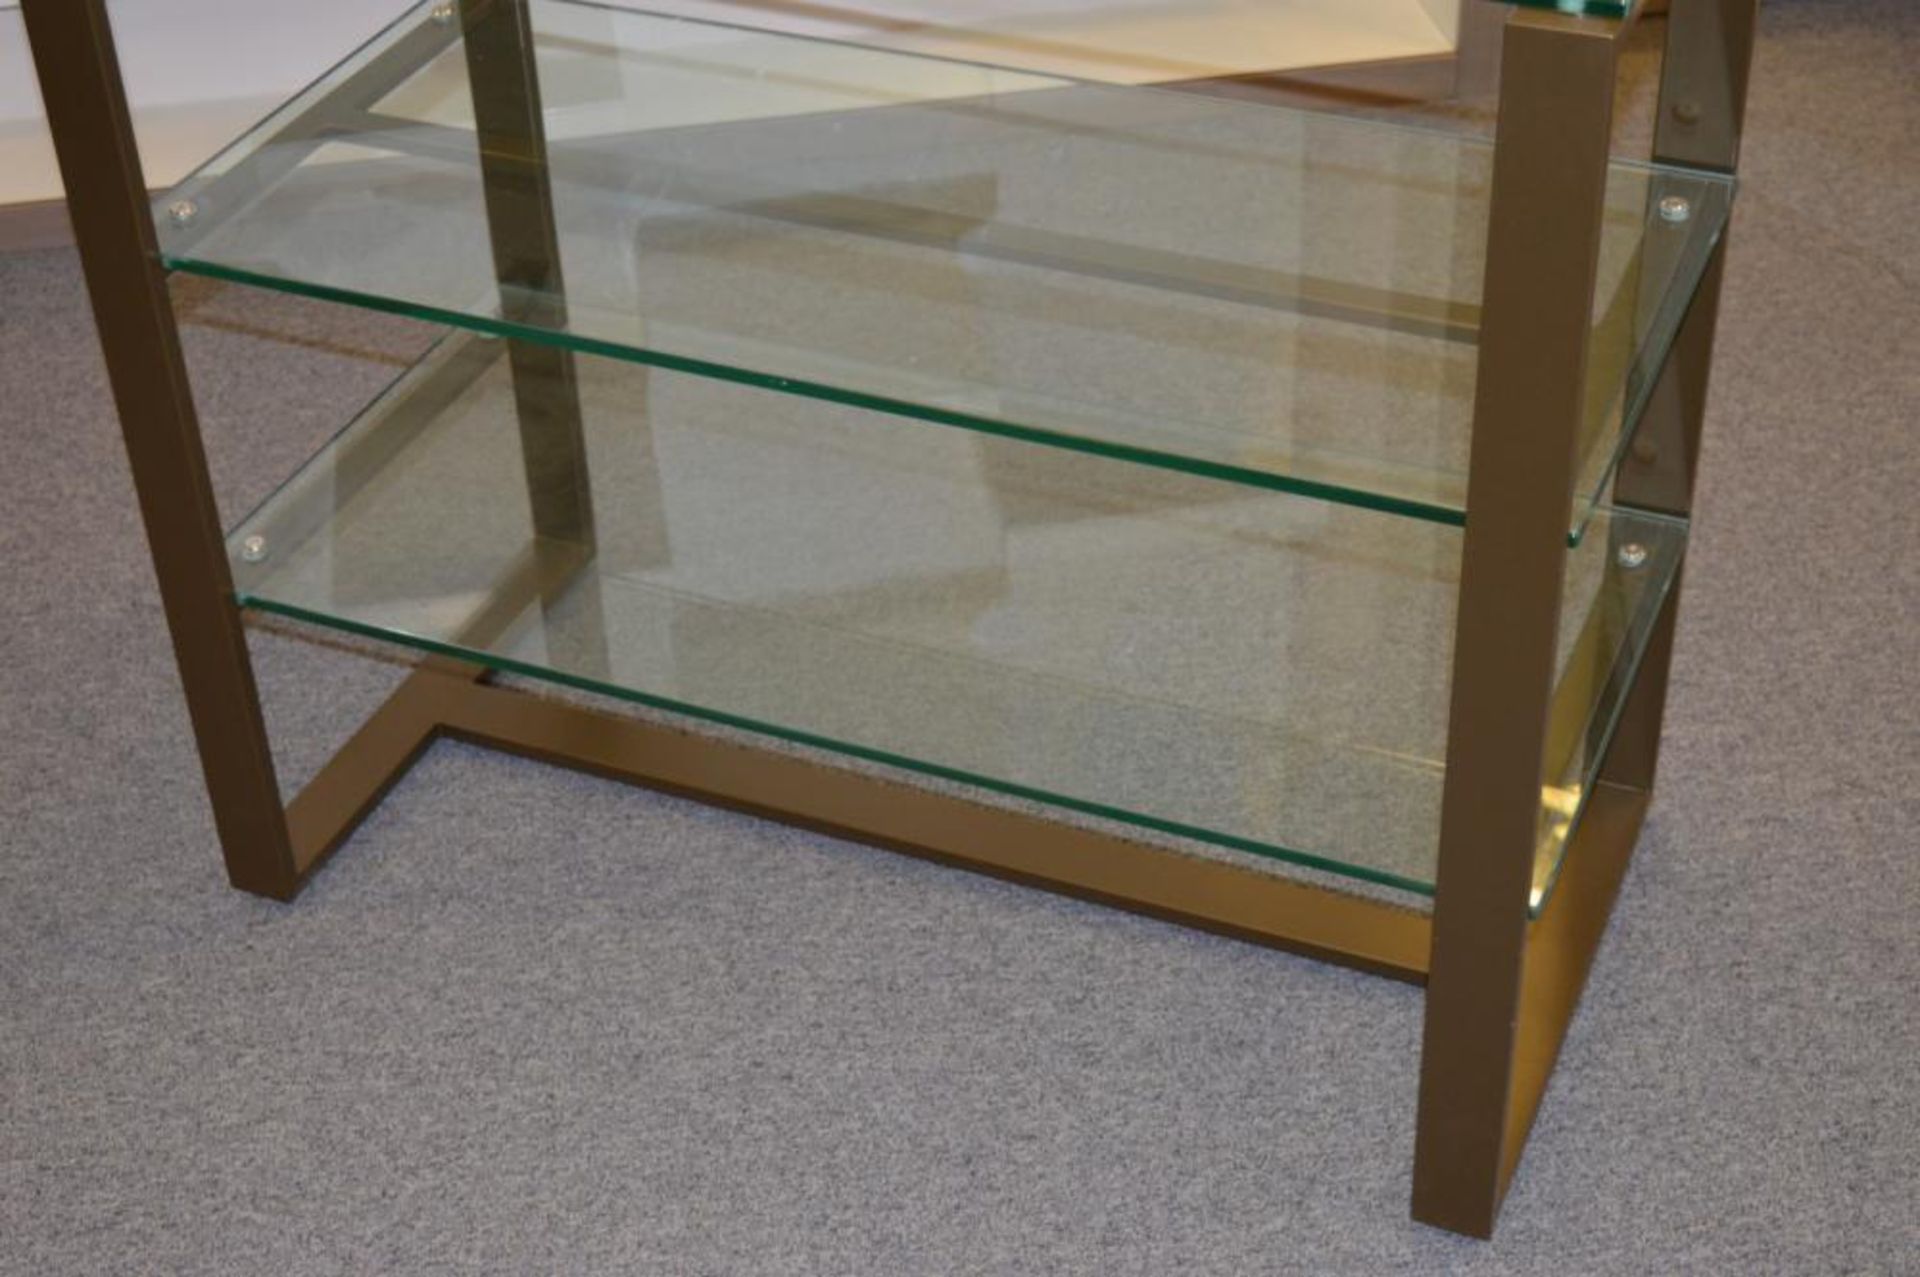 2 x Contemporary 3-Tier Glass Retail Display Shelving Units - Taken From A Well-Known Shoe Store - Image 2 of 3